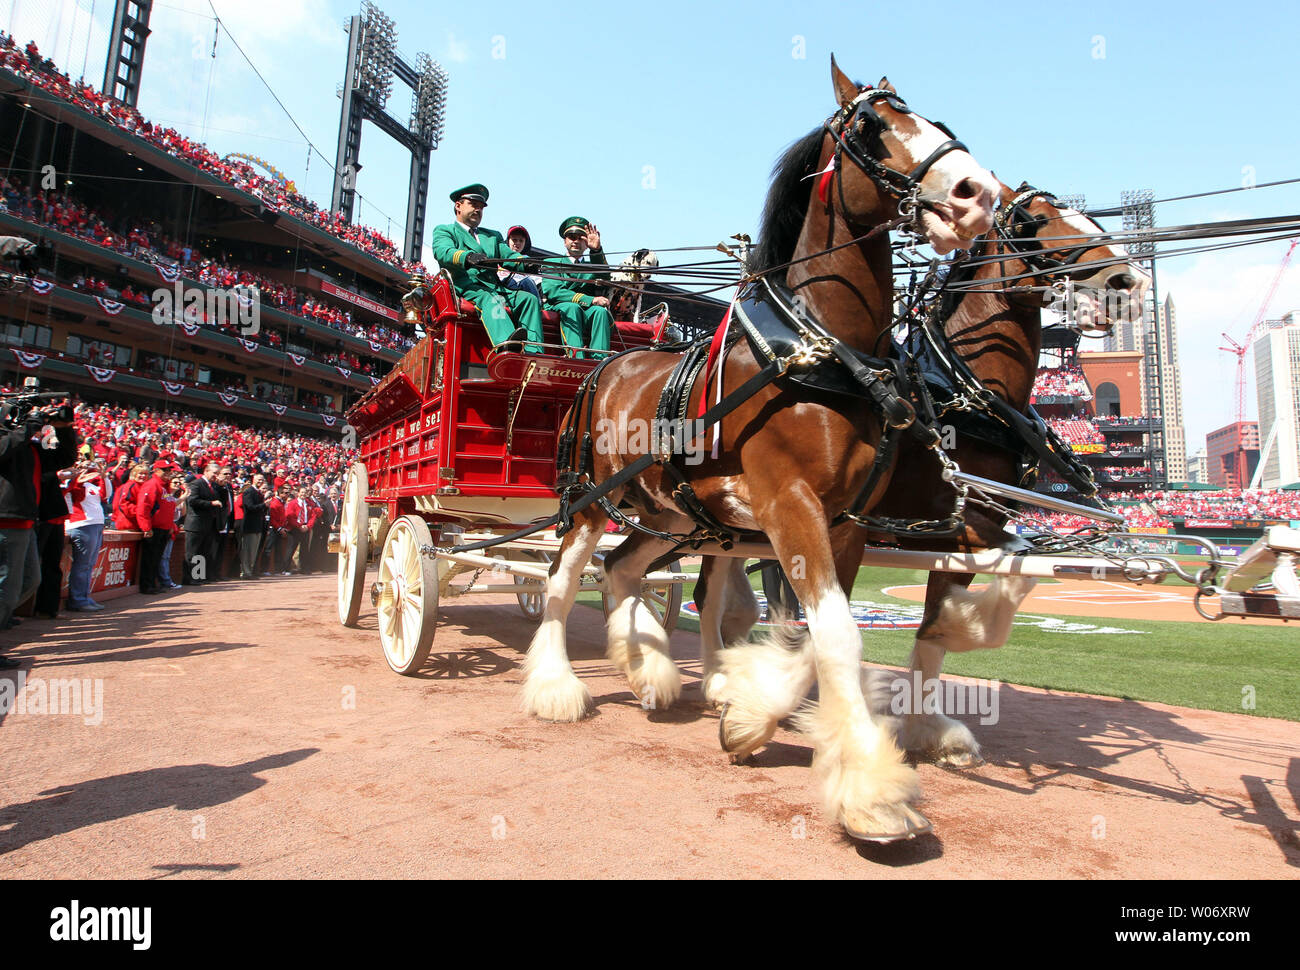 cardinals opening day clydesdales